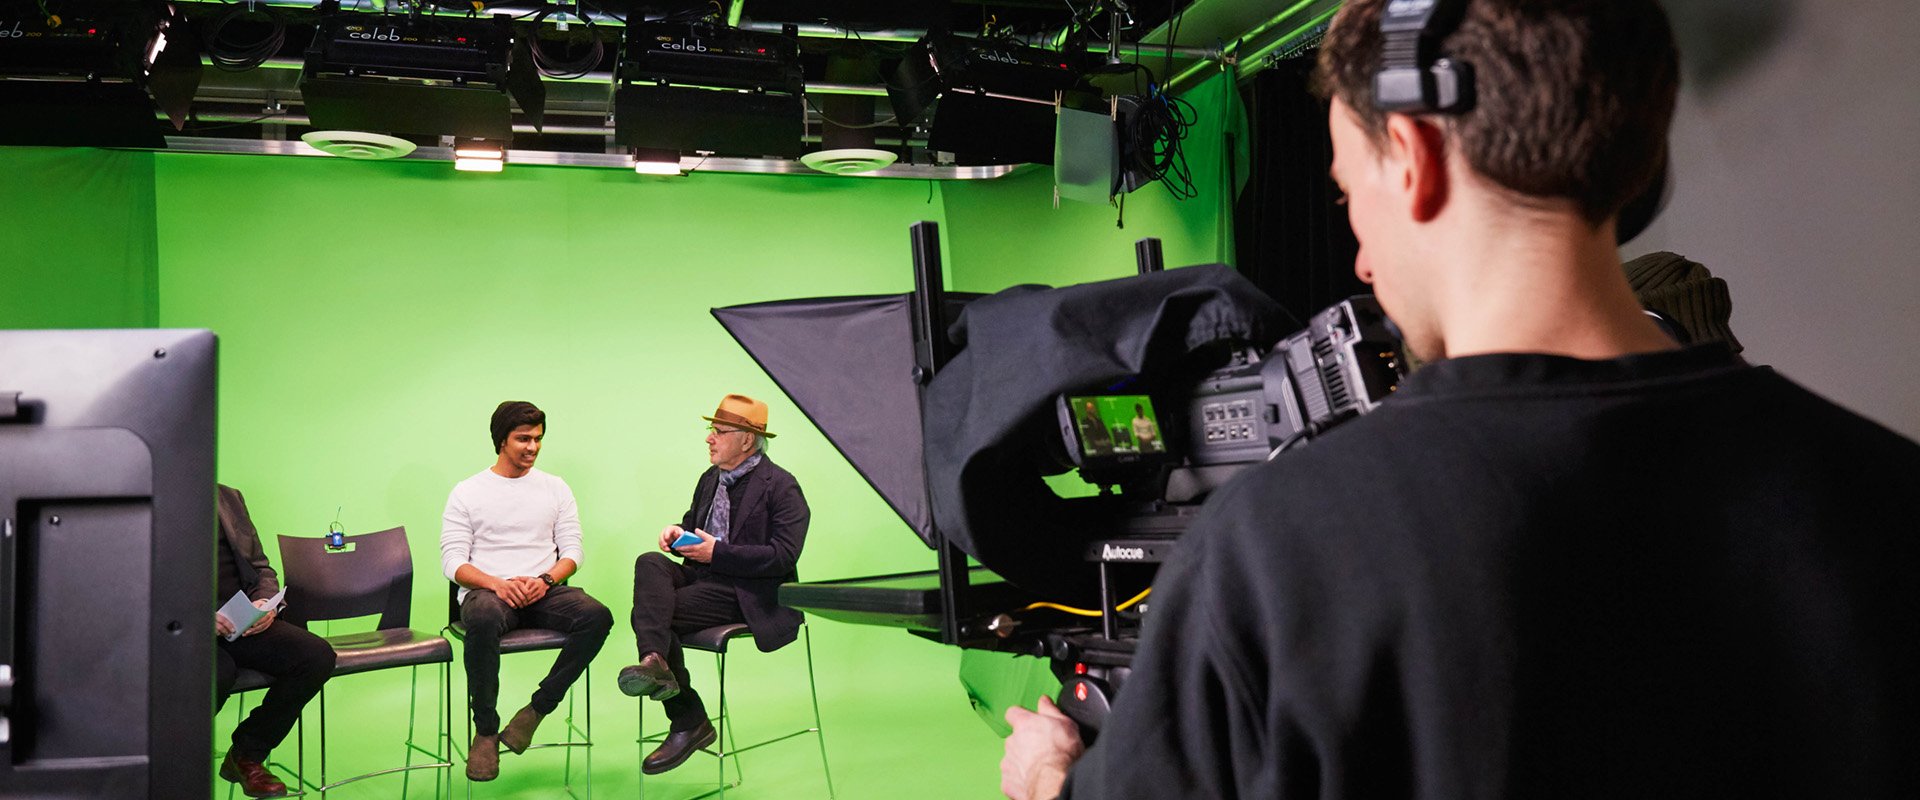 A camera man filming three people in front of a green screen.